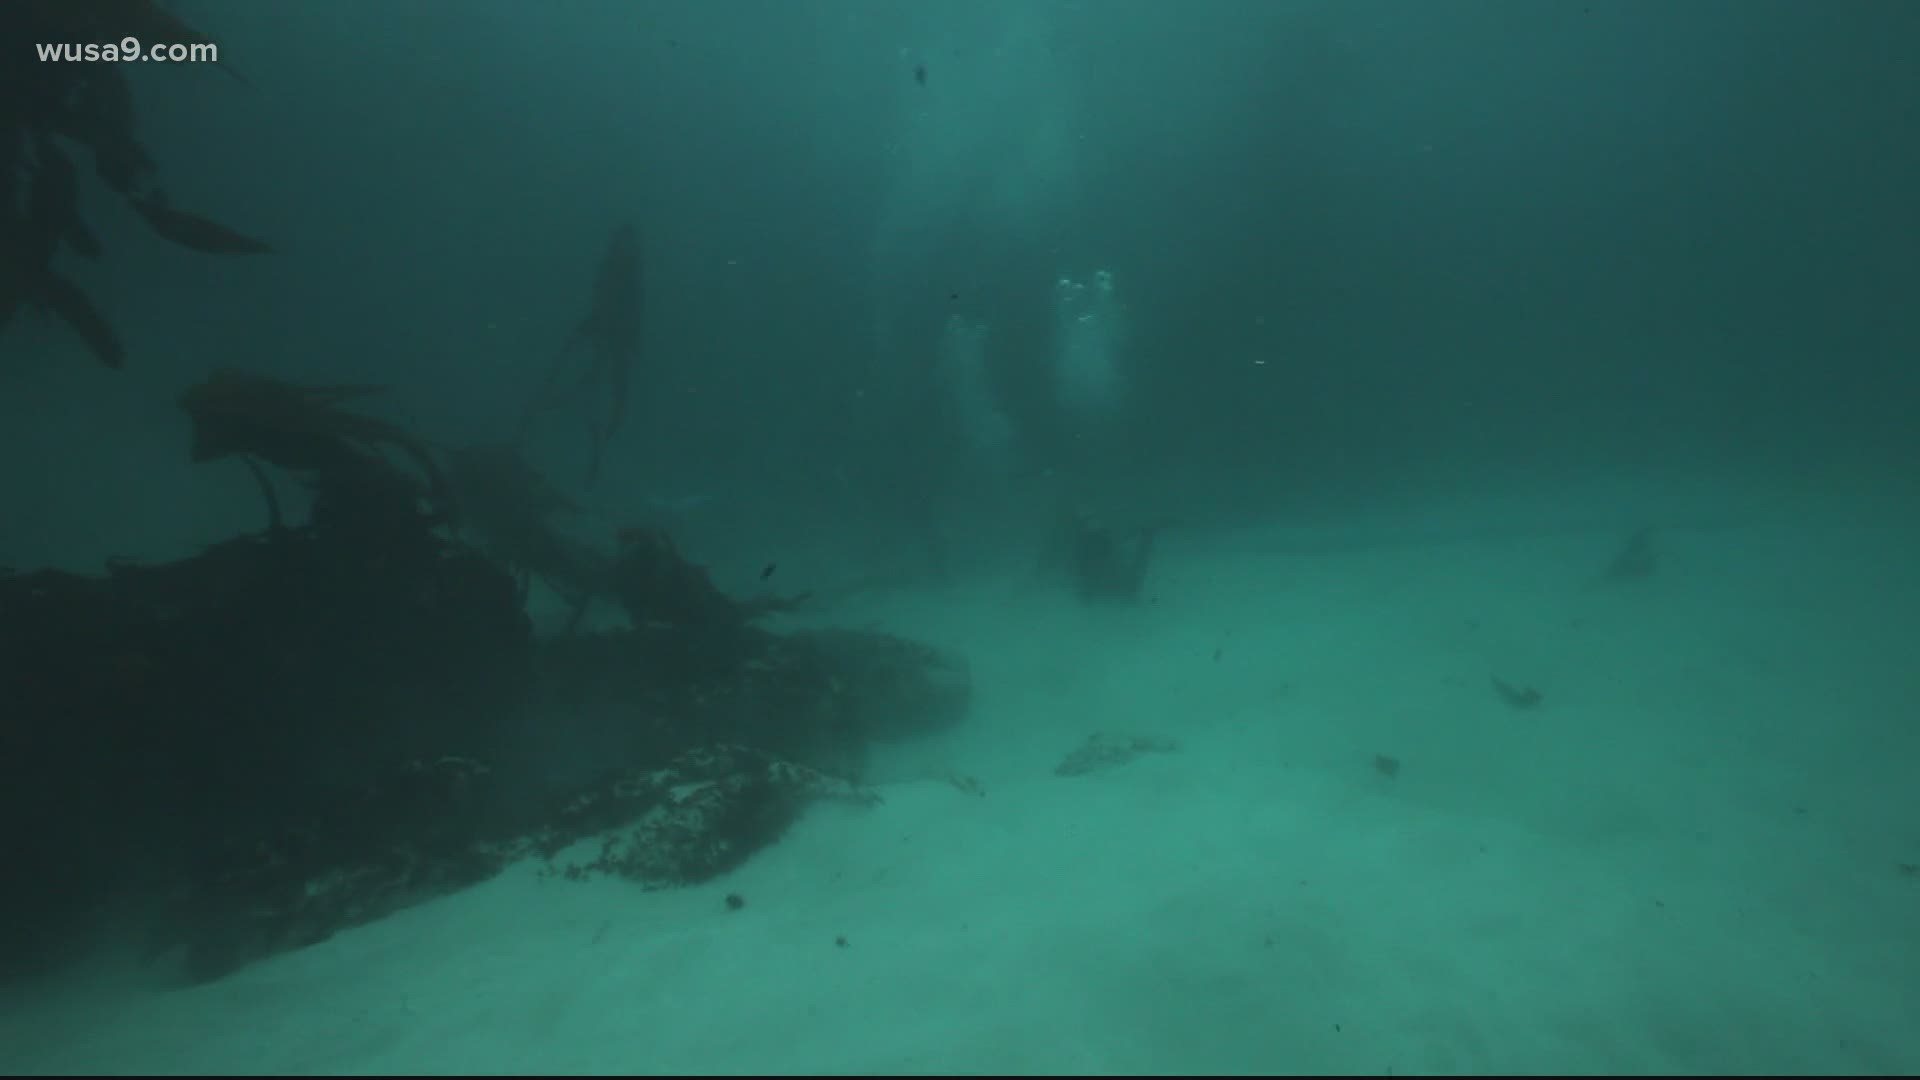 The Smithsonian’s National Museum of African American History and Culture "Slave Wrecks Project" identifies sites of wrecked slave ships around the world.